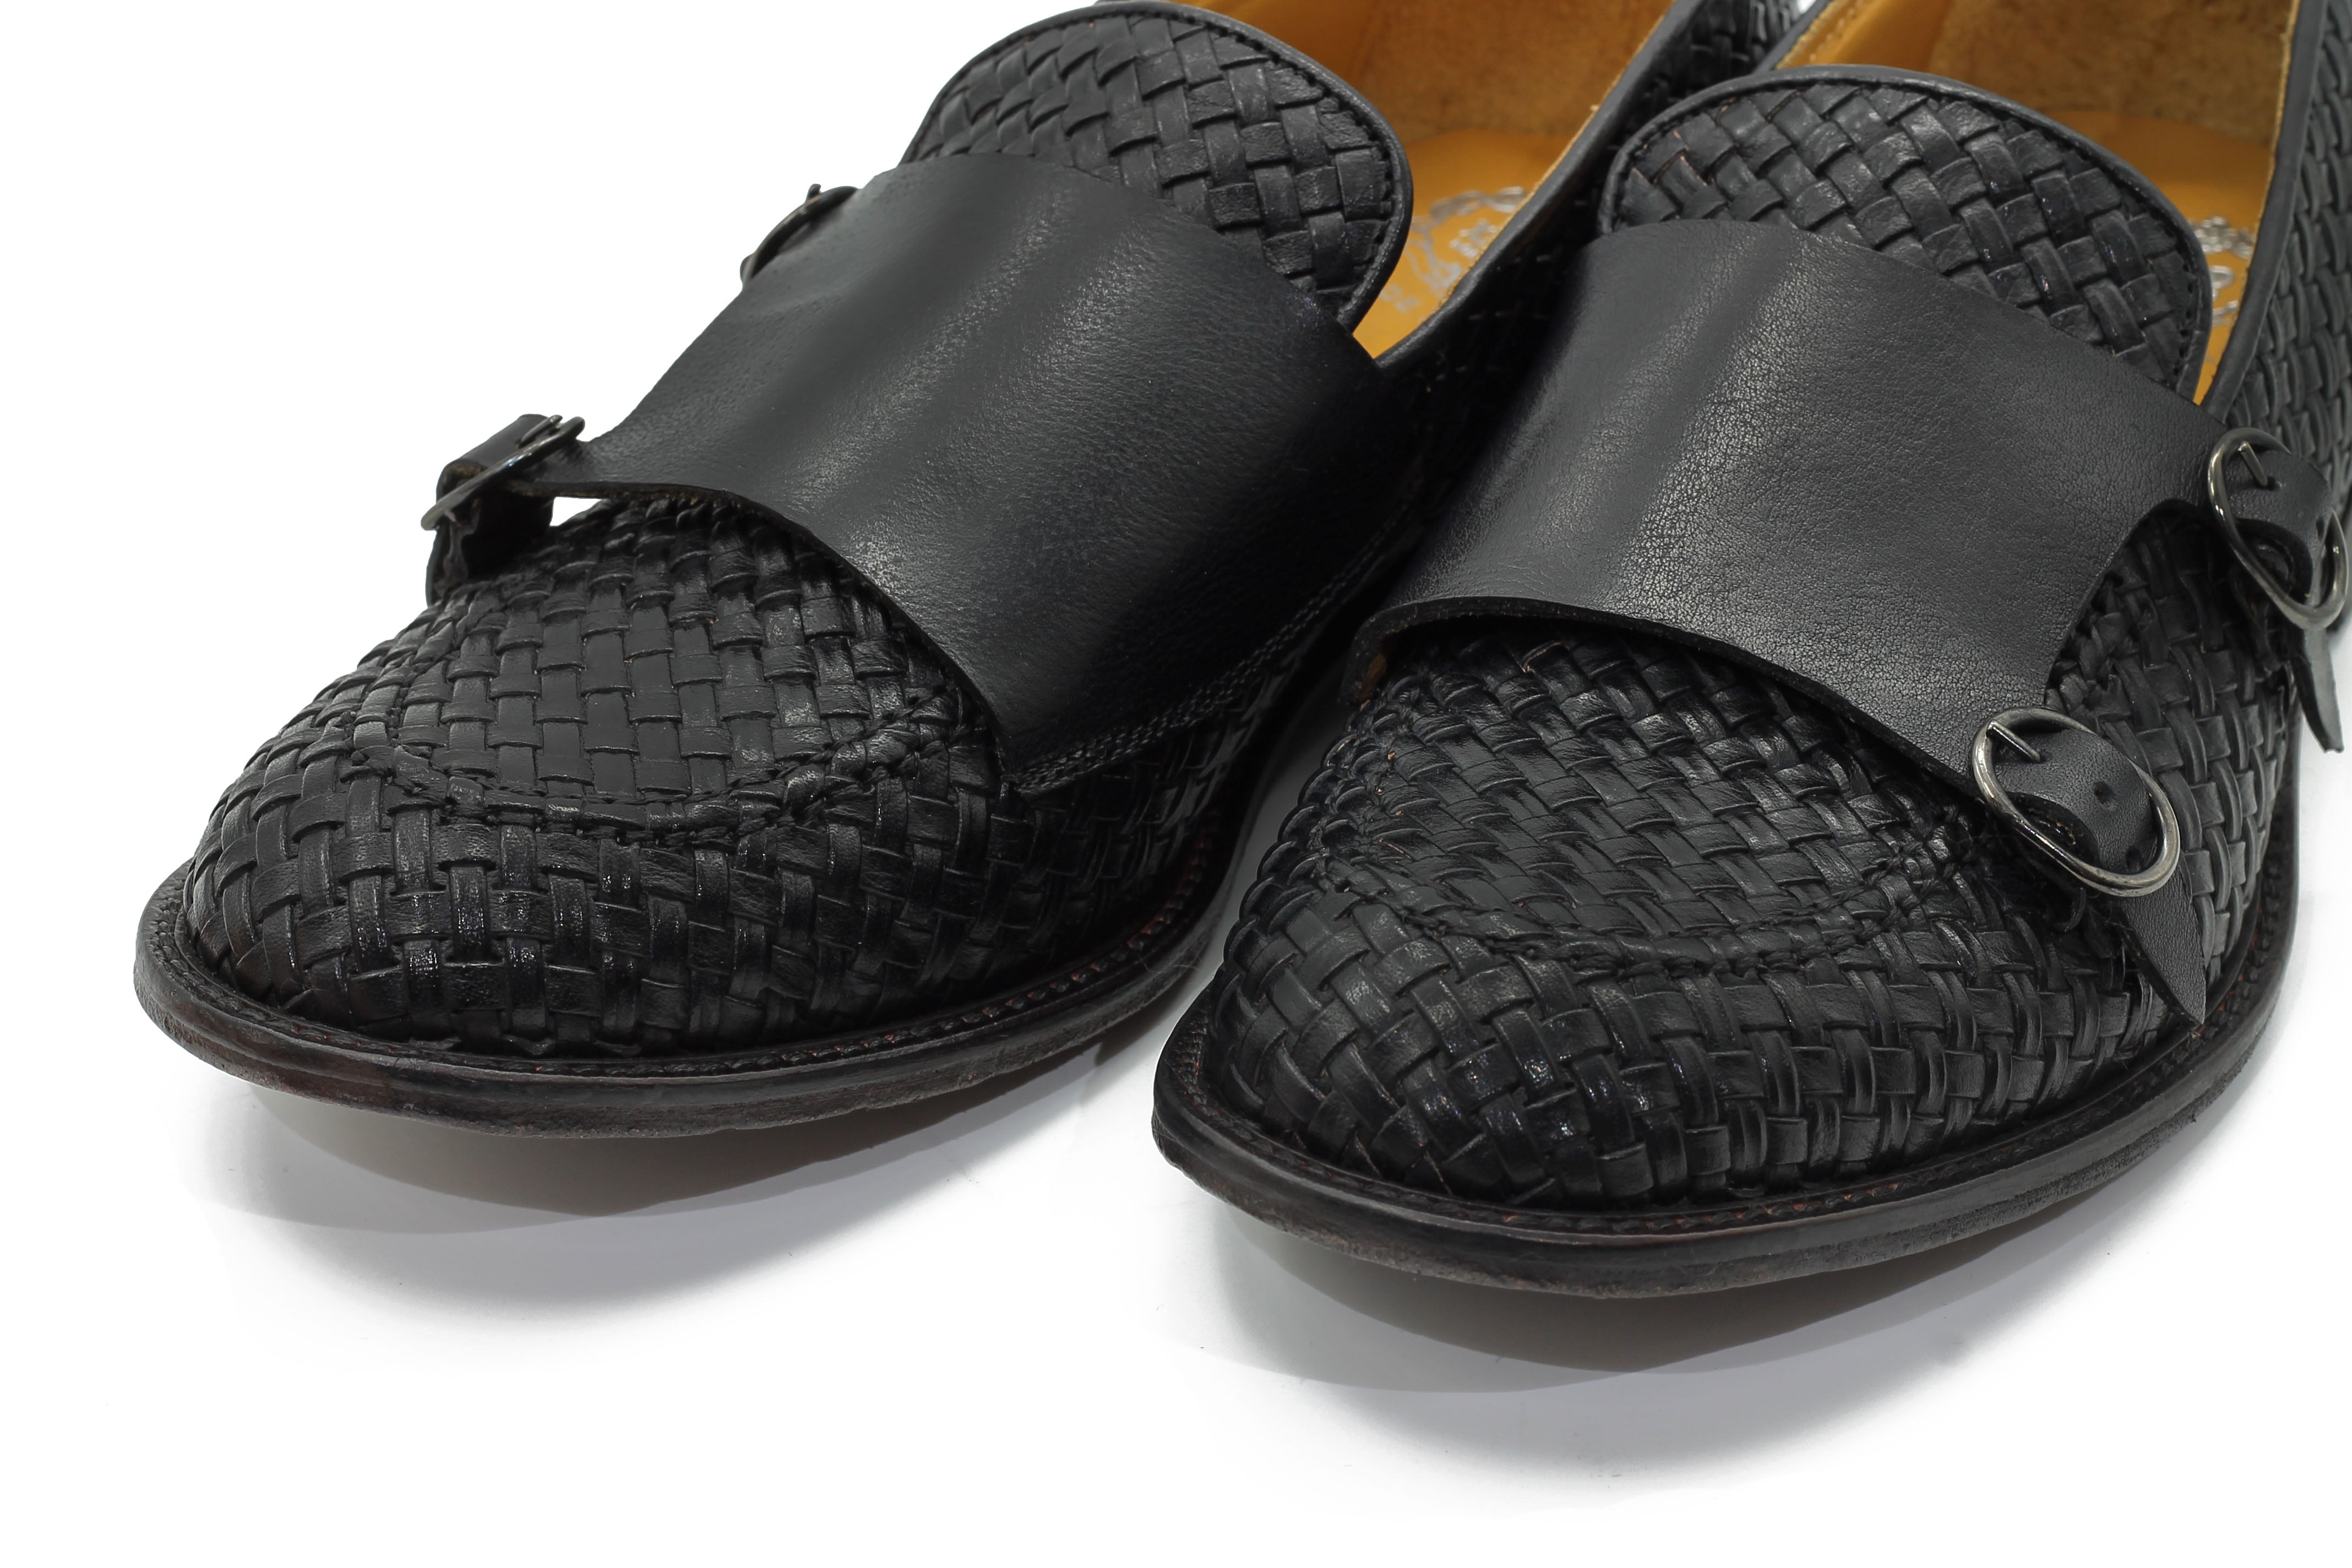 FLORENCE 2 - DOUBLE BUCKLE MONK LOAFER IN BLACK INTERWEAVE ITALIAN LEATHER